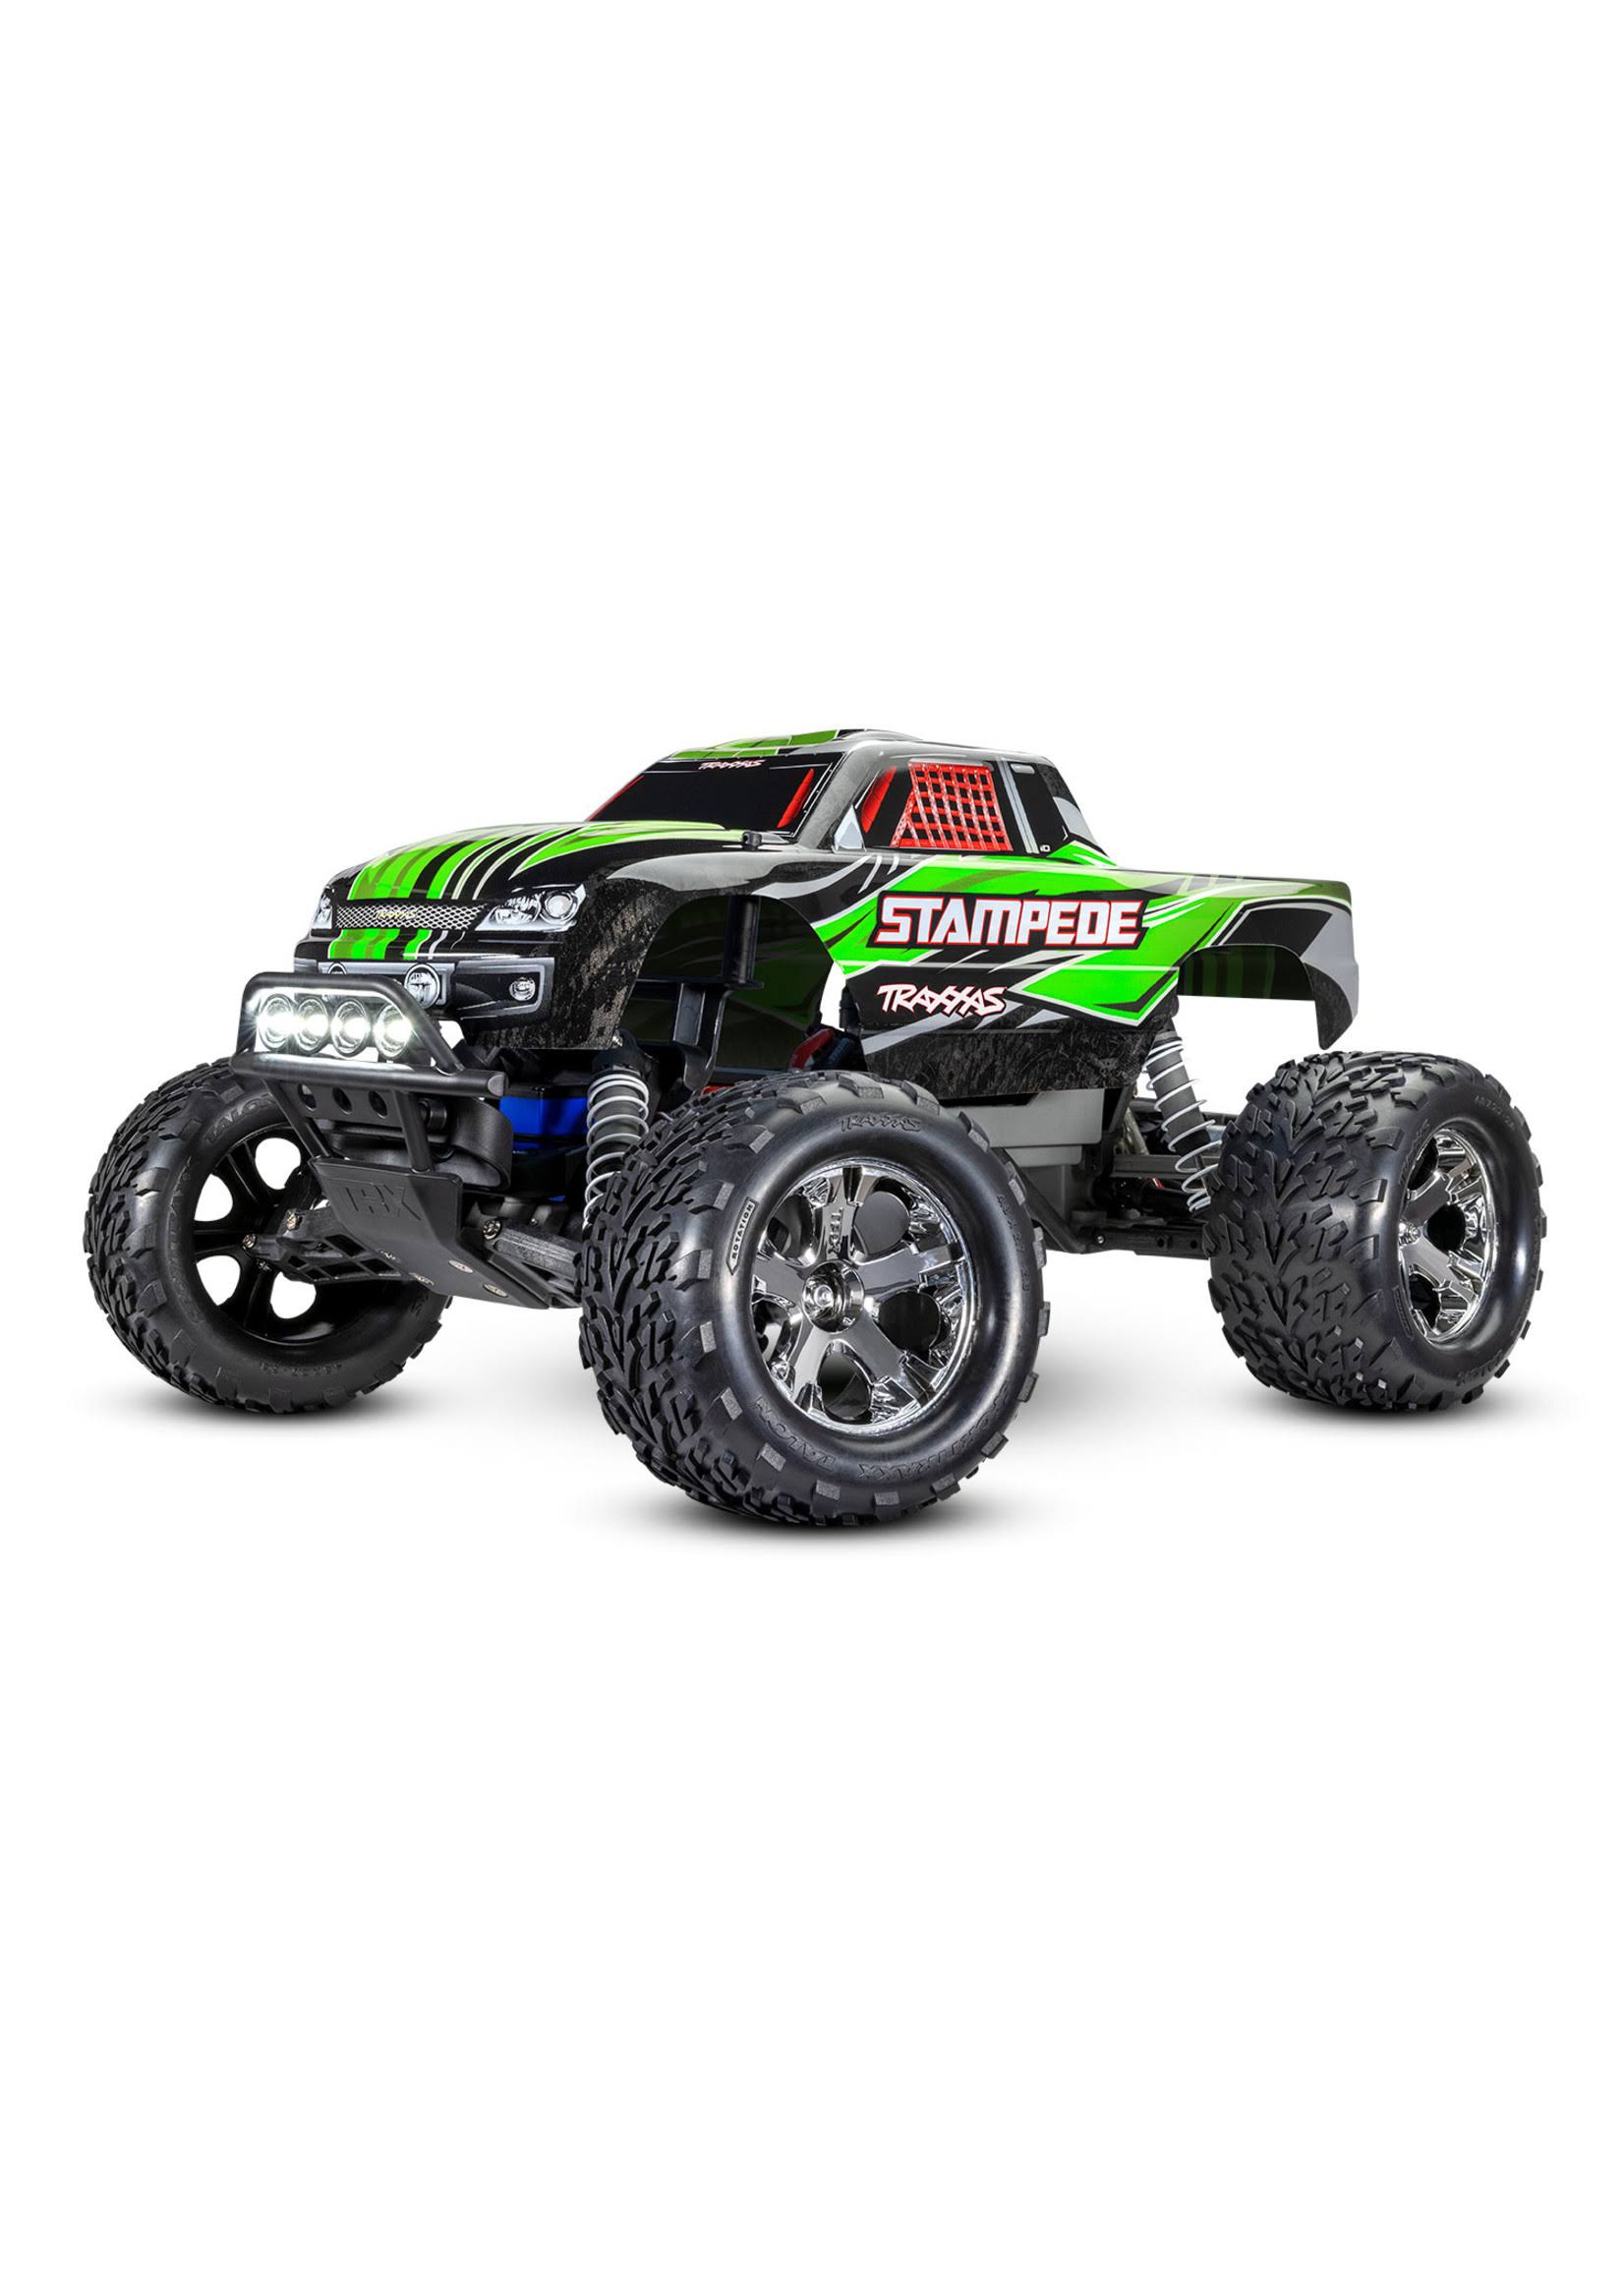 Traxxas Stampede 2WD 1/10 Monster Truck RTR TQ - LED (Green)